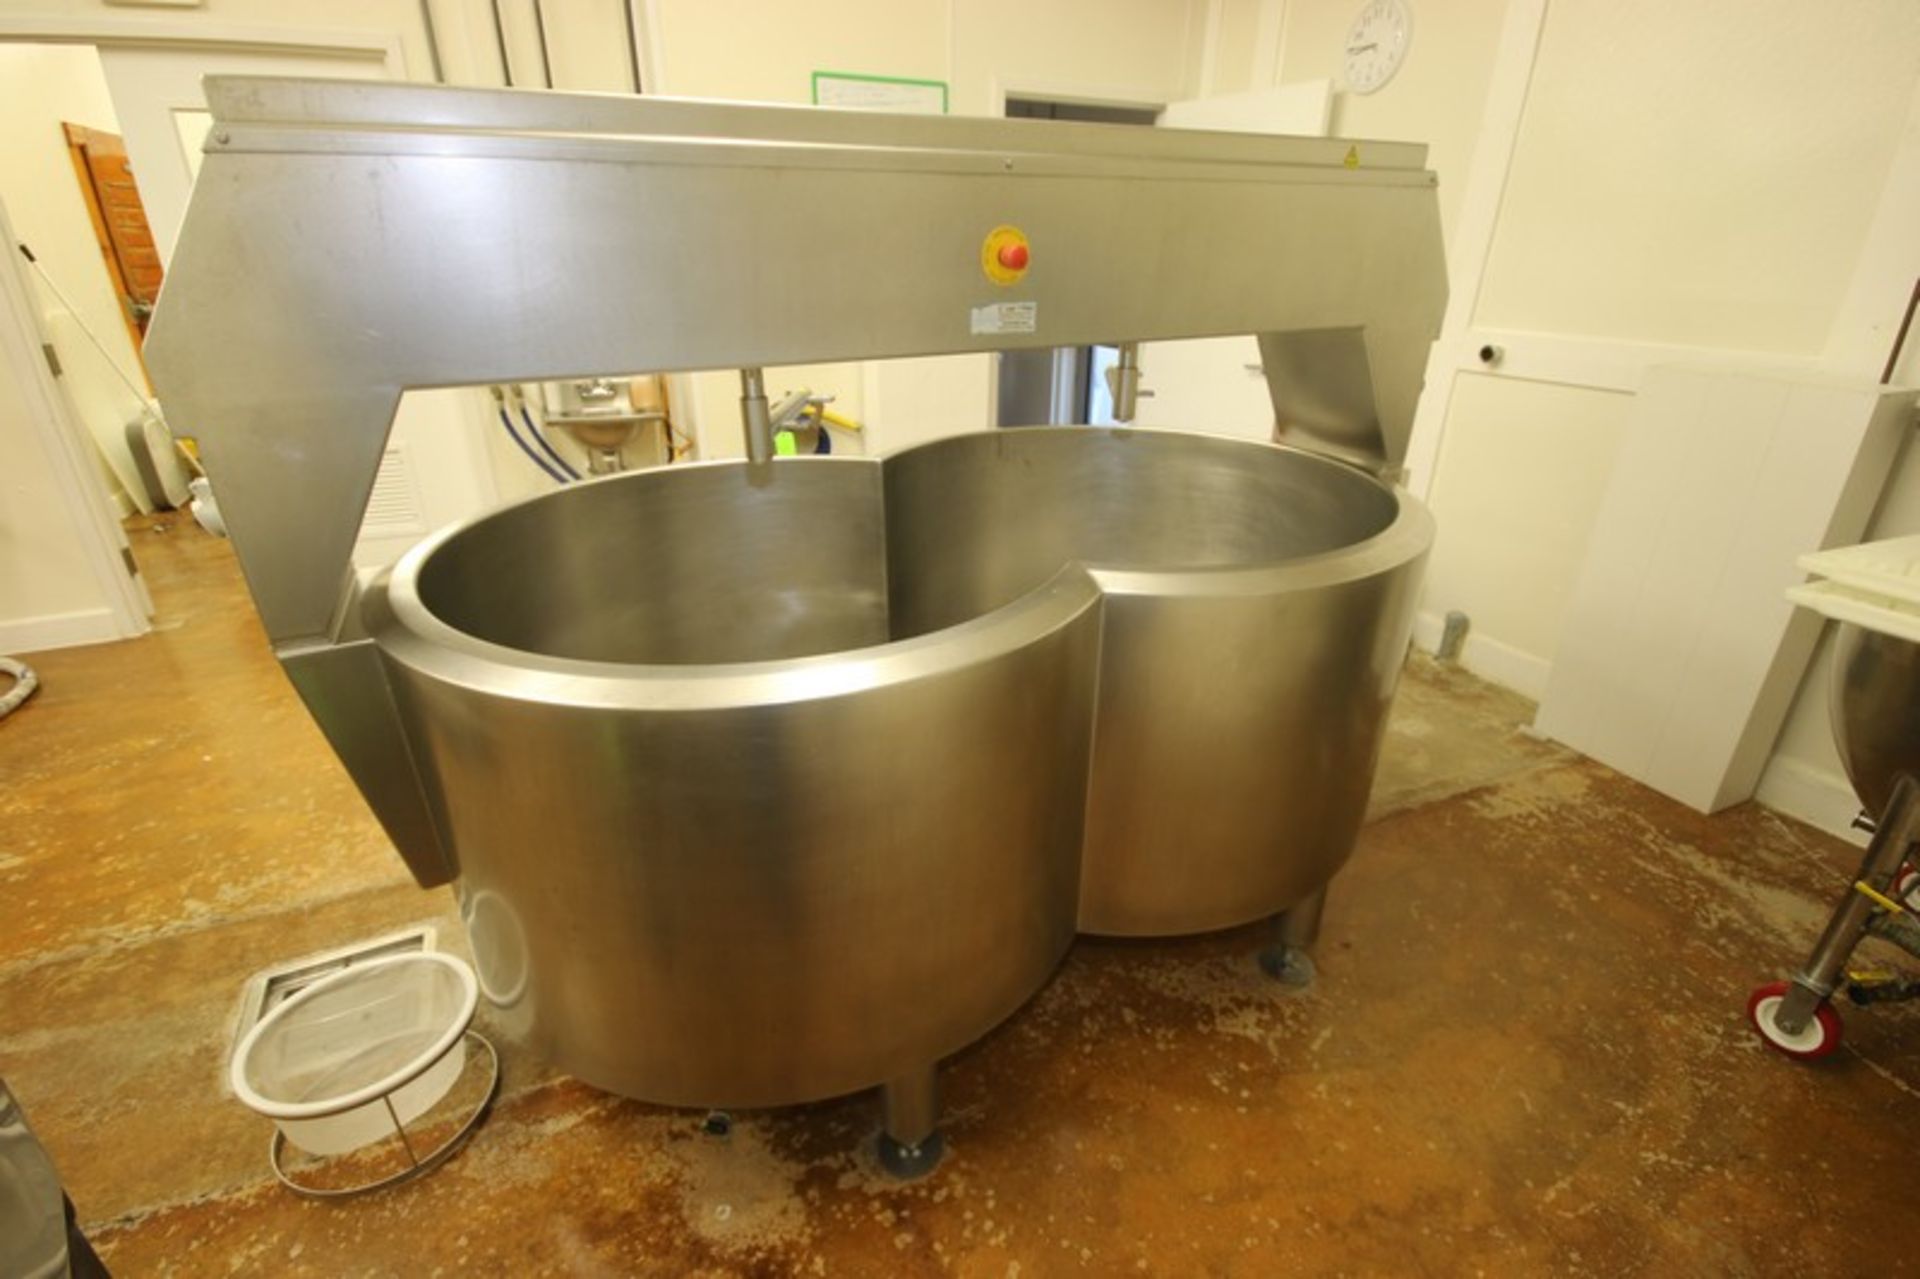 CVR 290 Gal. Double OO Cheesevat, S/N 0708019706, Includes Pump, Overall Dims.: Aprox. 8' L x 53" - Image 3 of 13